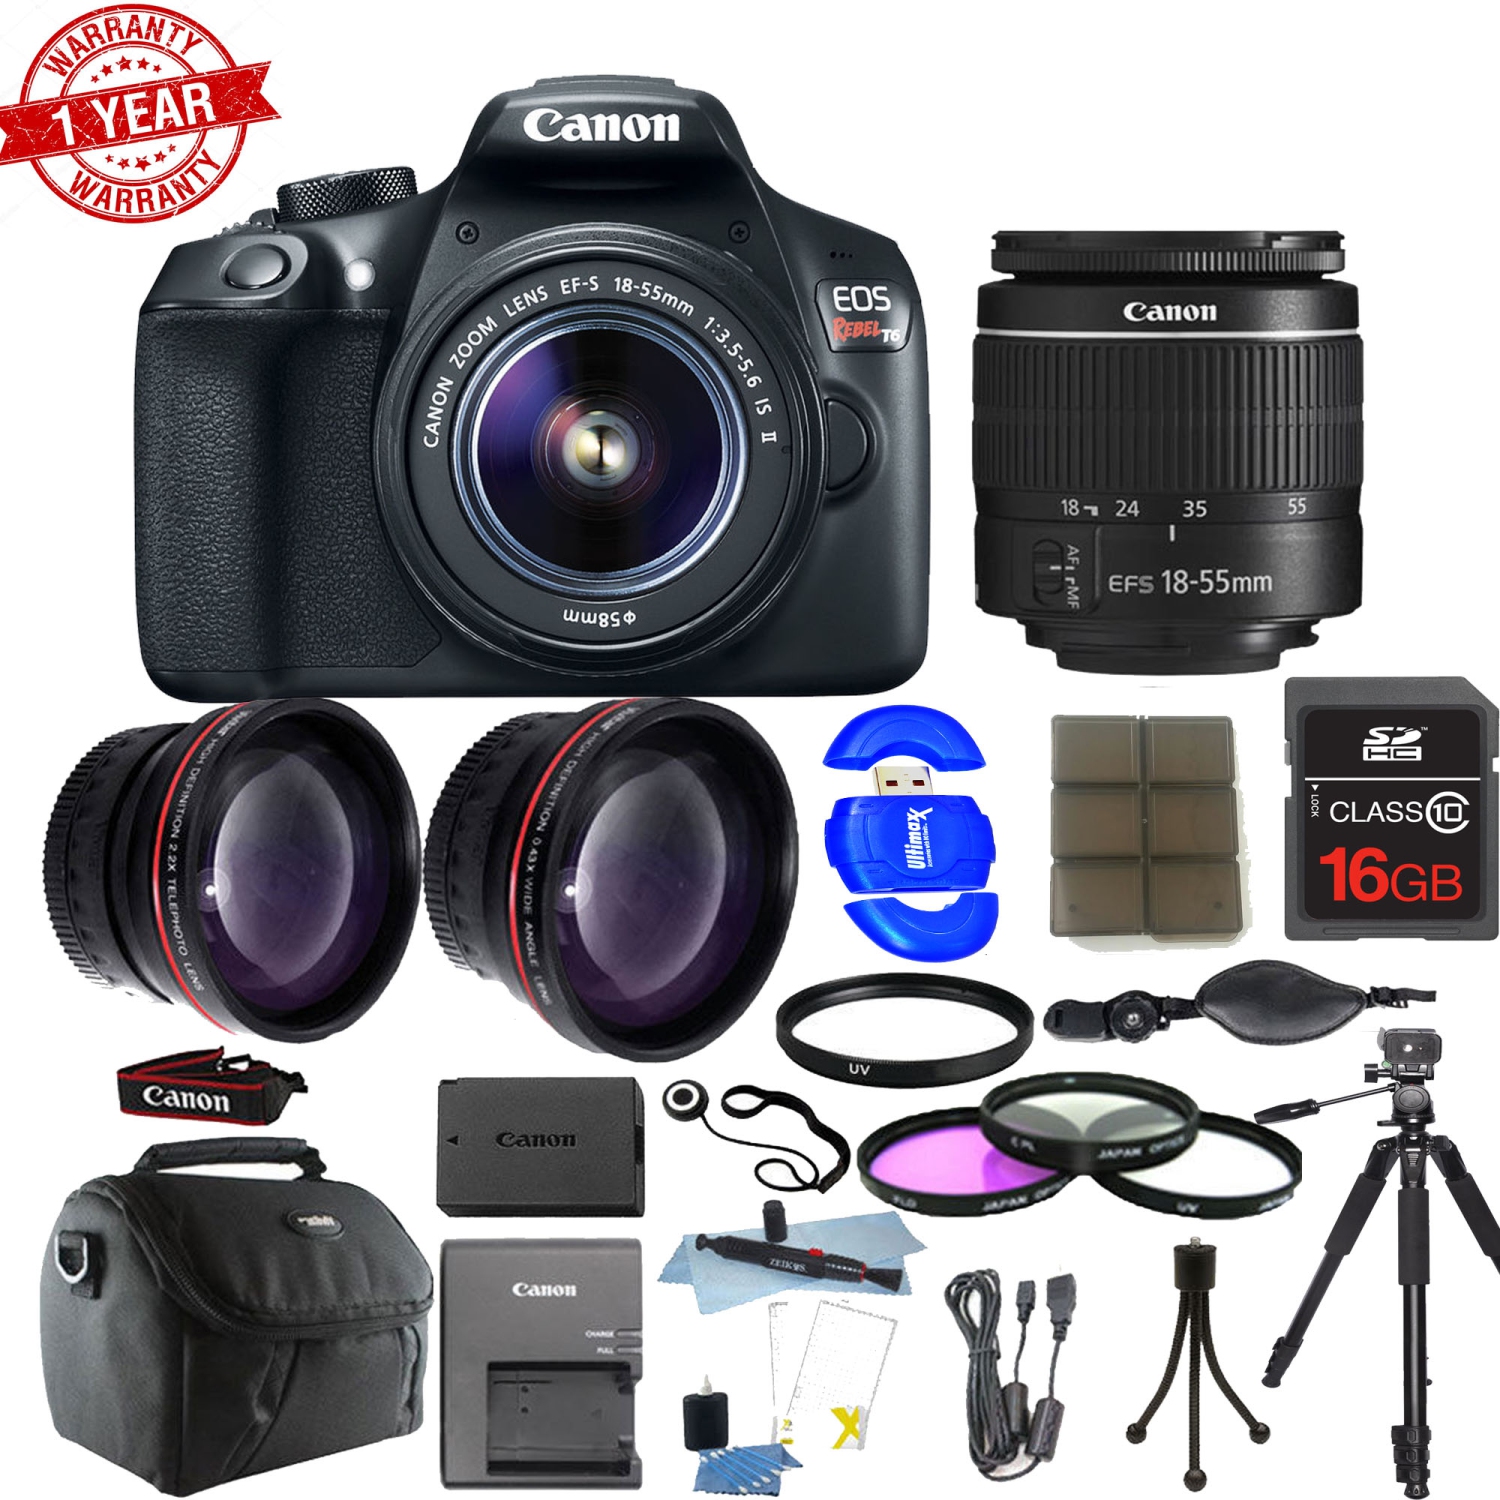 Canon EOS Rebel 1300D / T6 18MP DSLR Camera with 18-55mm Lens & 16GB Accessory Kit - US Version w/ Seller Warranty